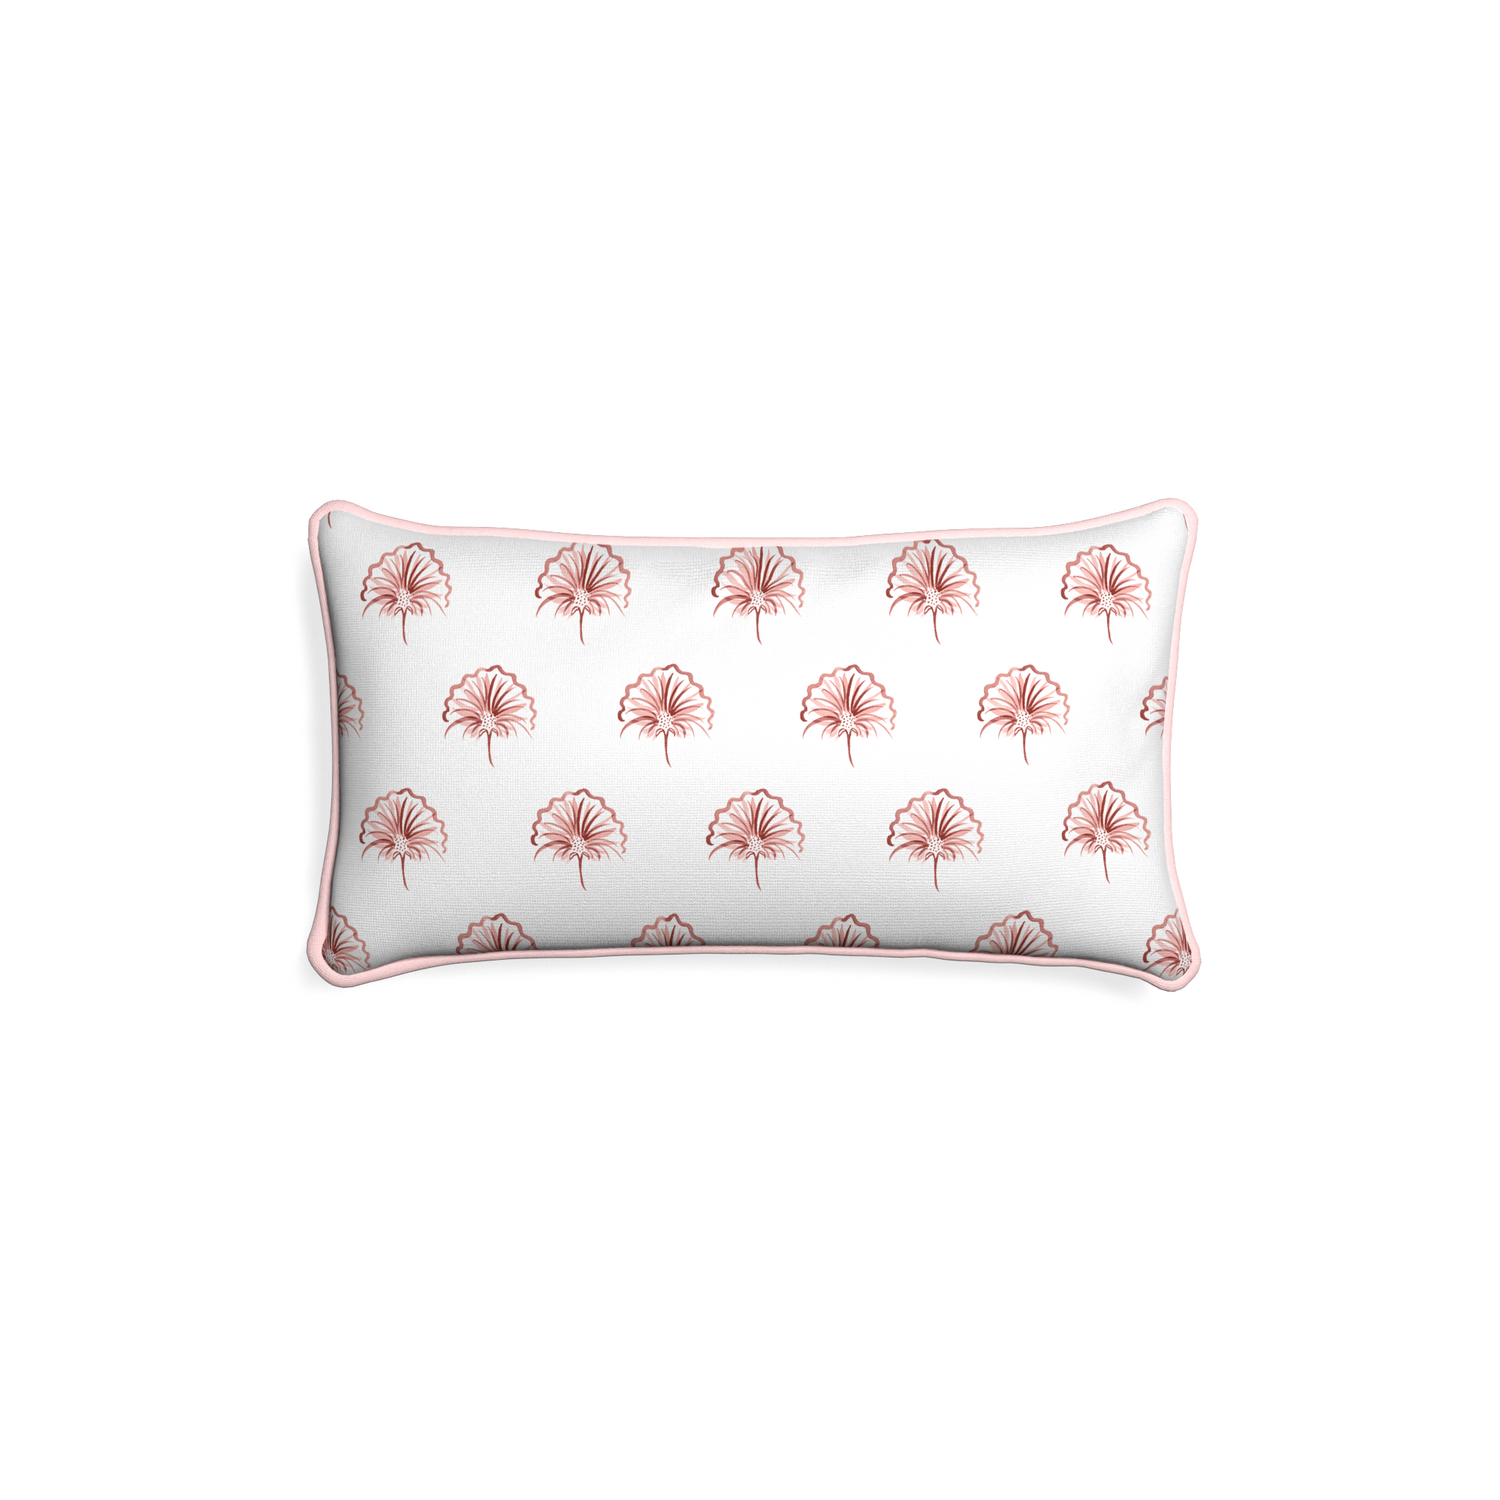 Petite-lumbar penelope rose custom floral pinkpillow with petal piping on white background